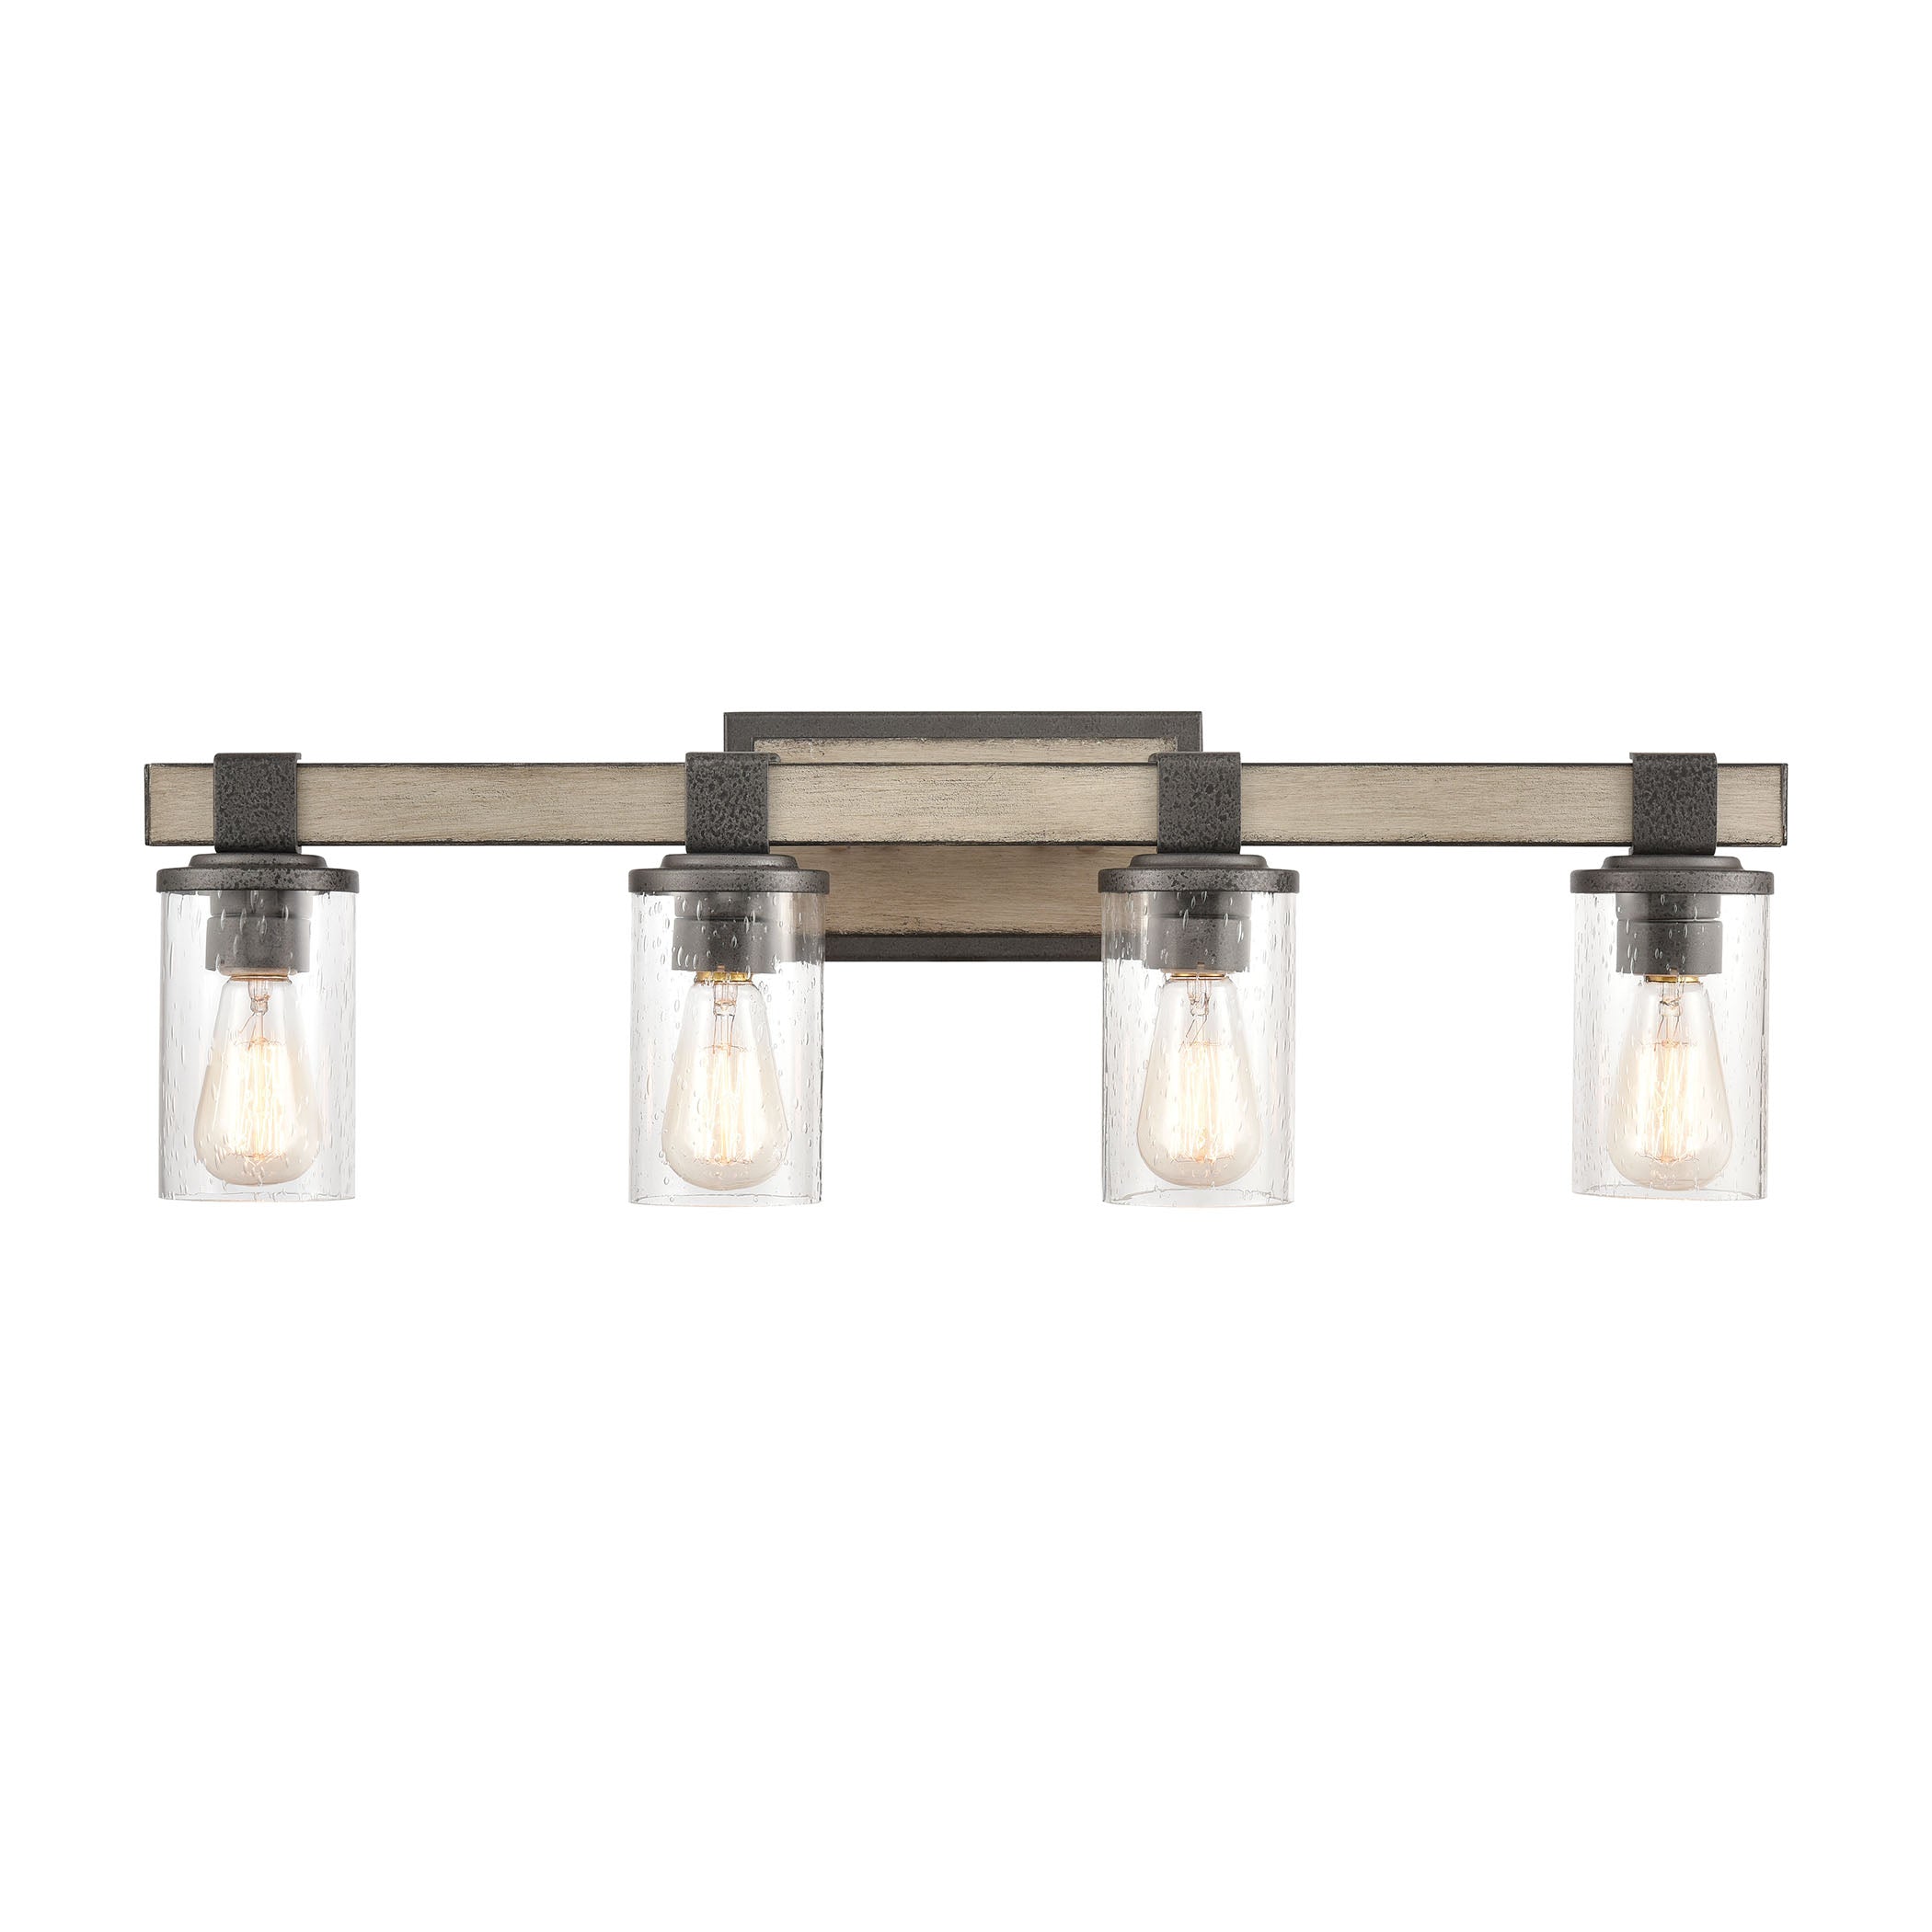 ELK Lighting 89143/4 Crenshaw 4-Light Vanity Light in Anvil Iron and Distressed Antique Graywood with Seedy Glass